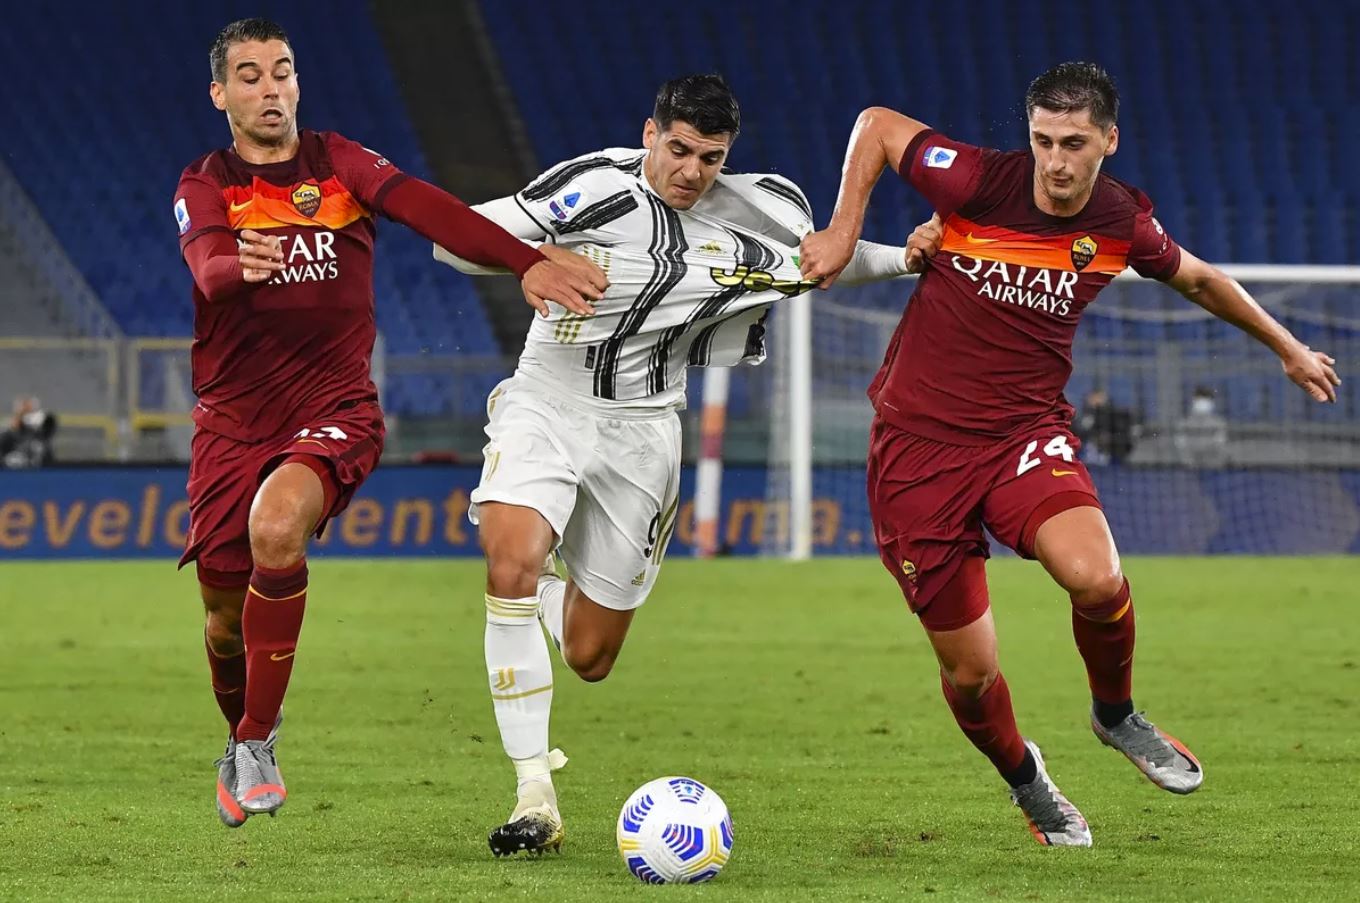 Alvaro Morata - here sandwiched between Leonardo Spinazzola and Marash Kumbulla - received the "Roma defense treatment" in the day of his second debut with Juventus